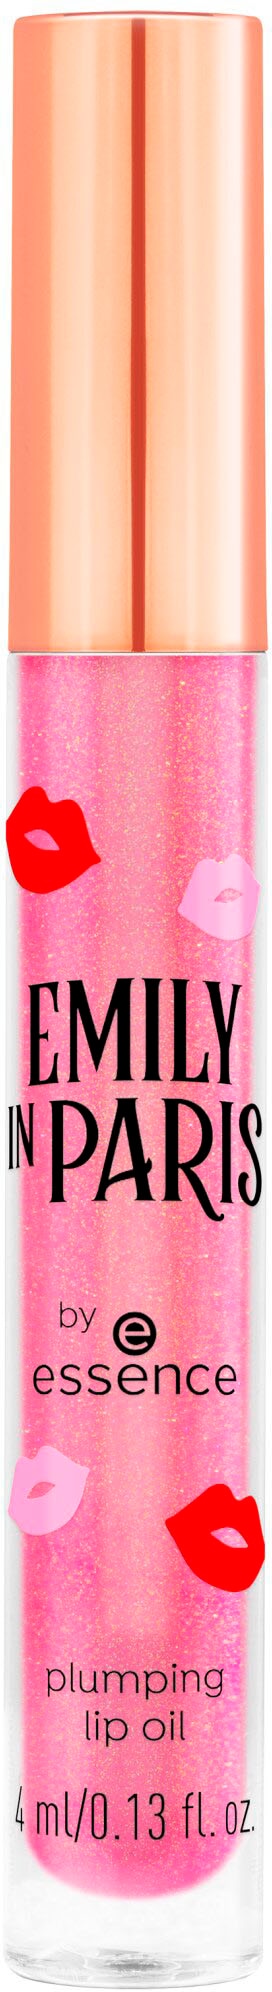 PARIS online oil« »EMILY bei essence Lipgloss lip by IN UNIVERSAL plumping Essence